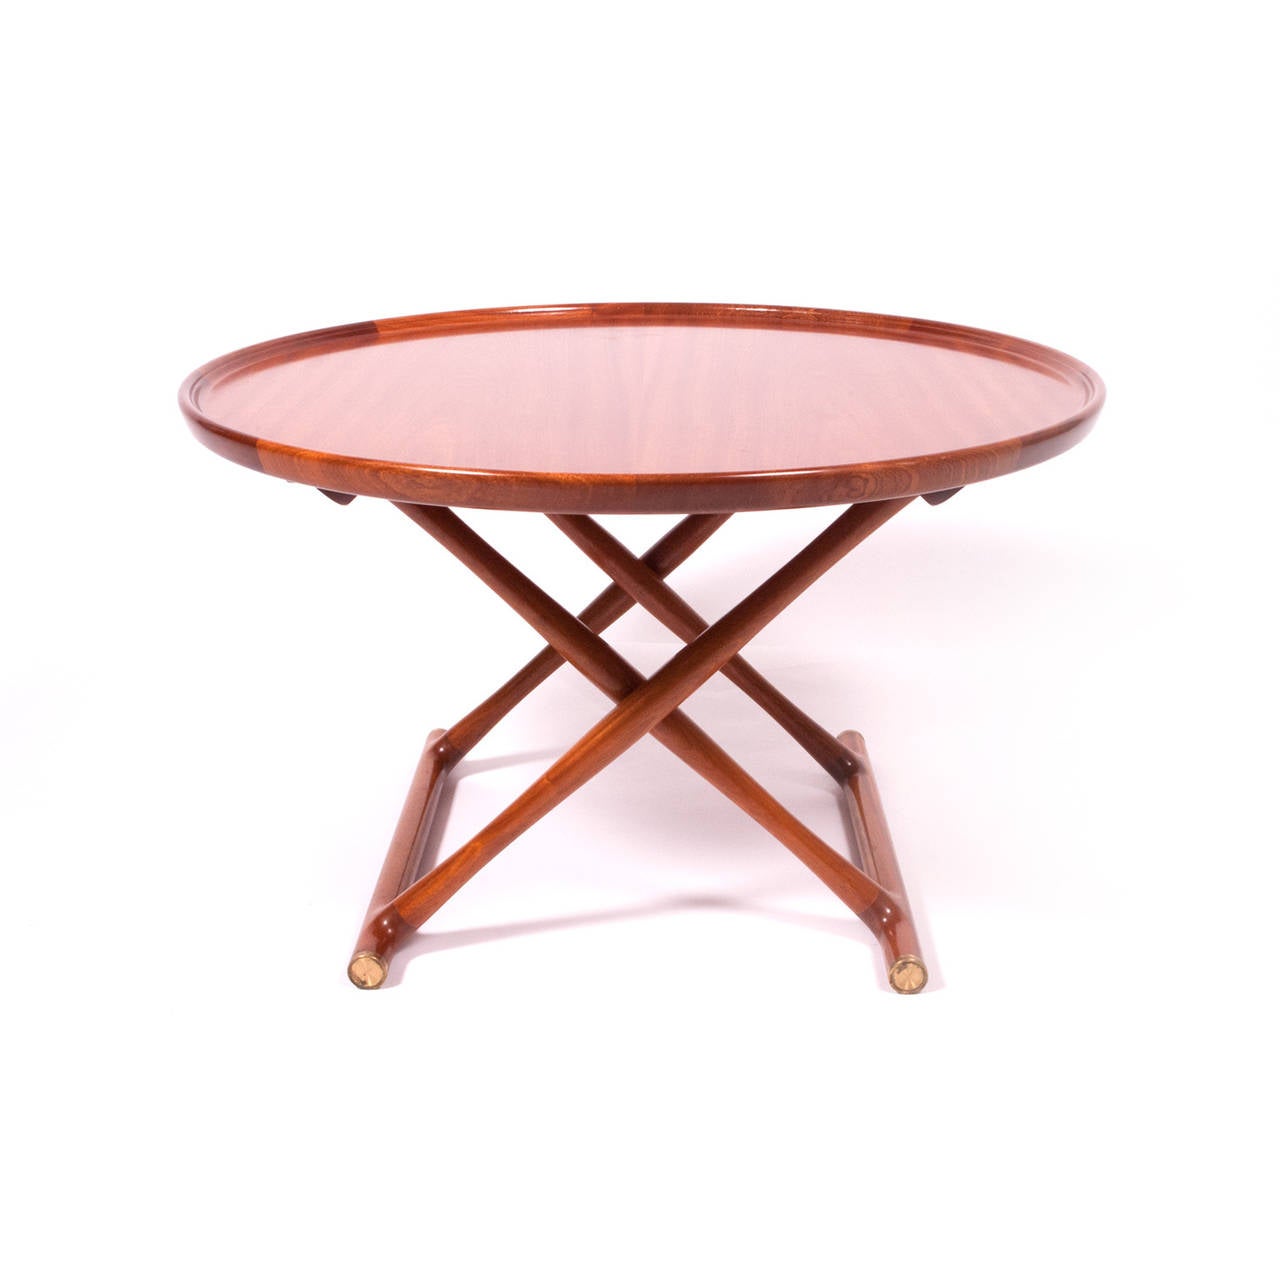 Beautiful occasional table, mahogany with brass detail. Table folds for storage. Made by Rud Rasmussen